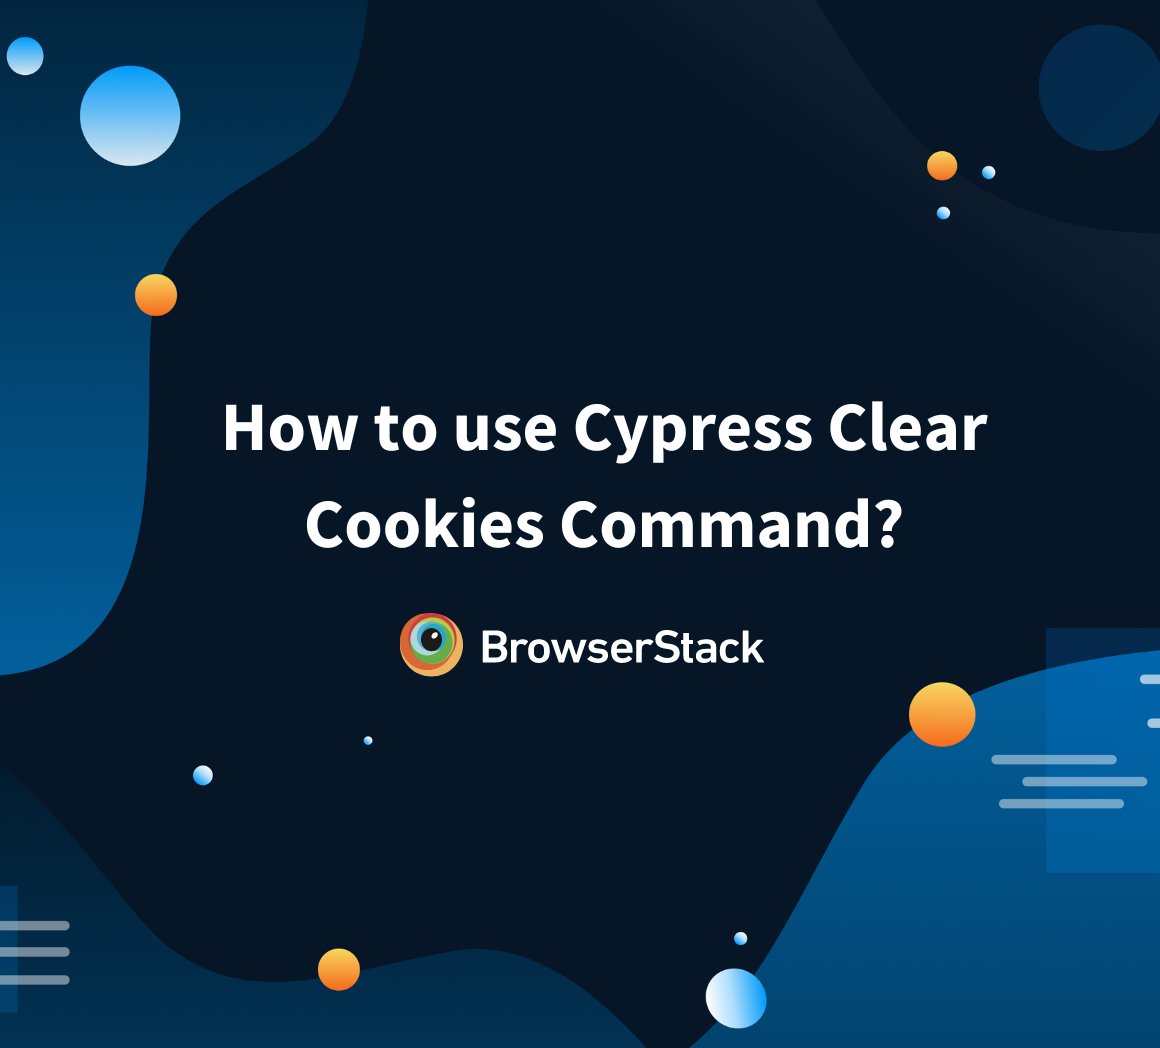 How to use Cypress Clear Cookies Command